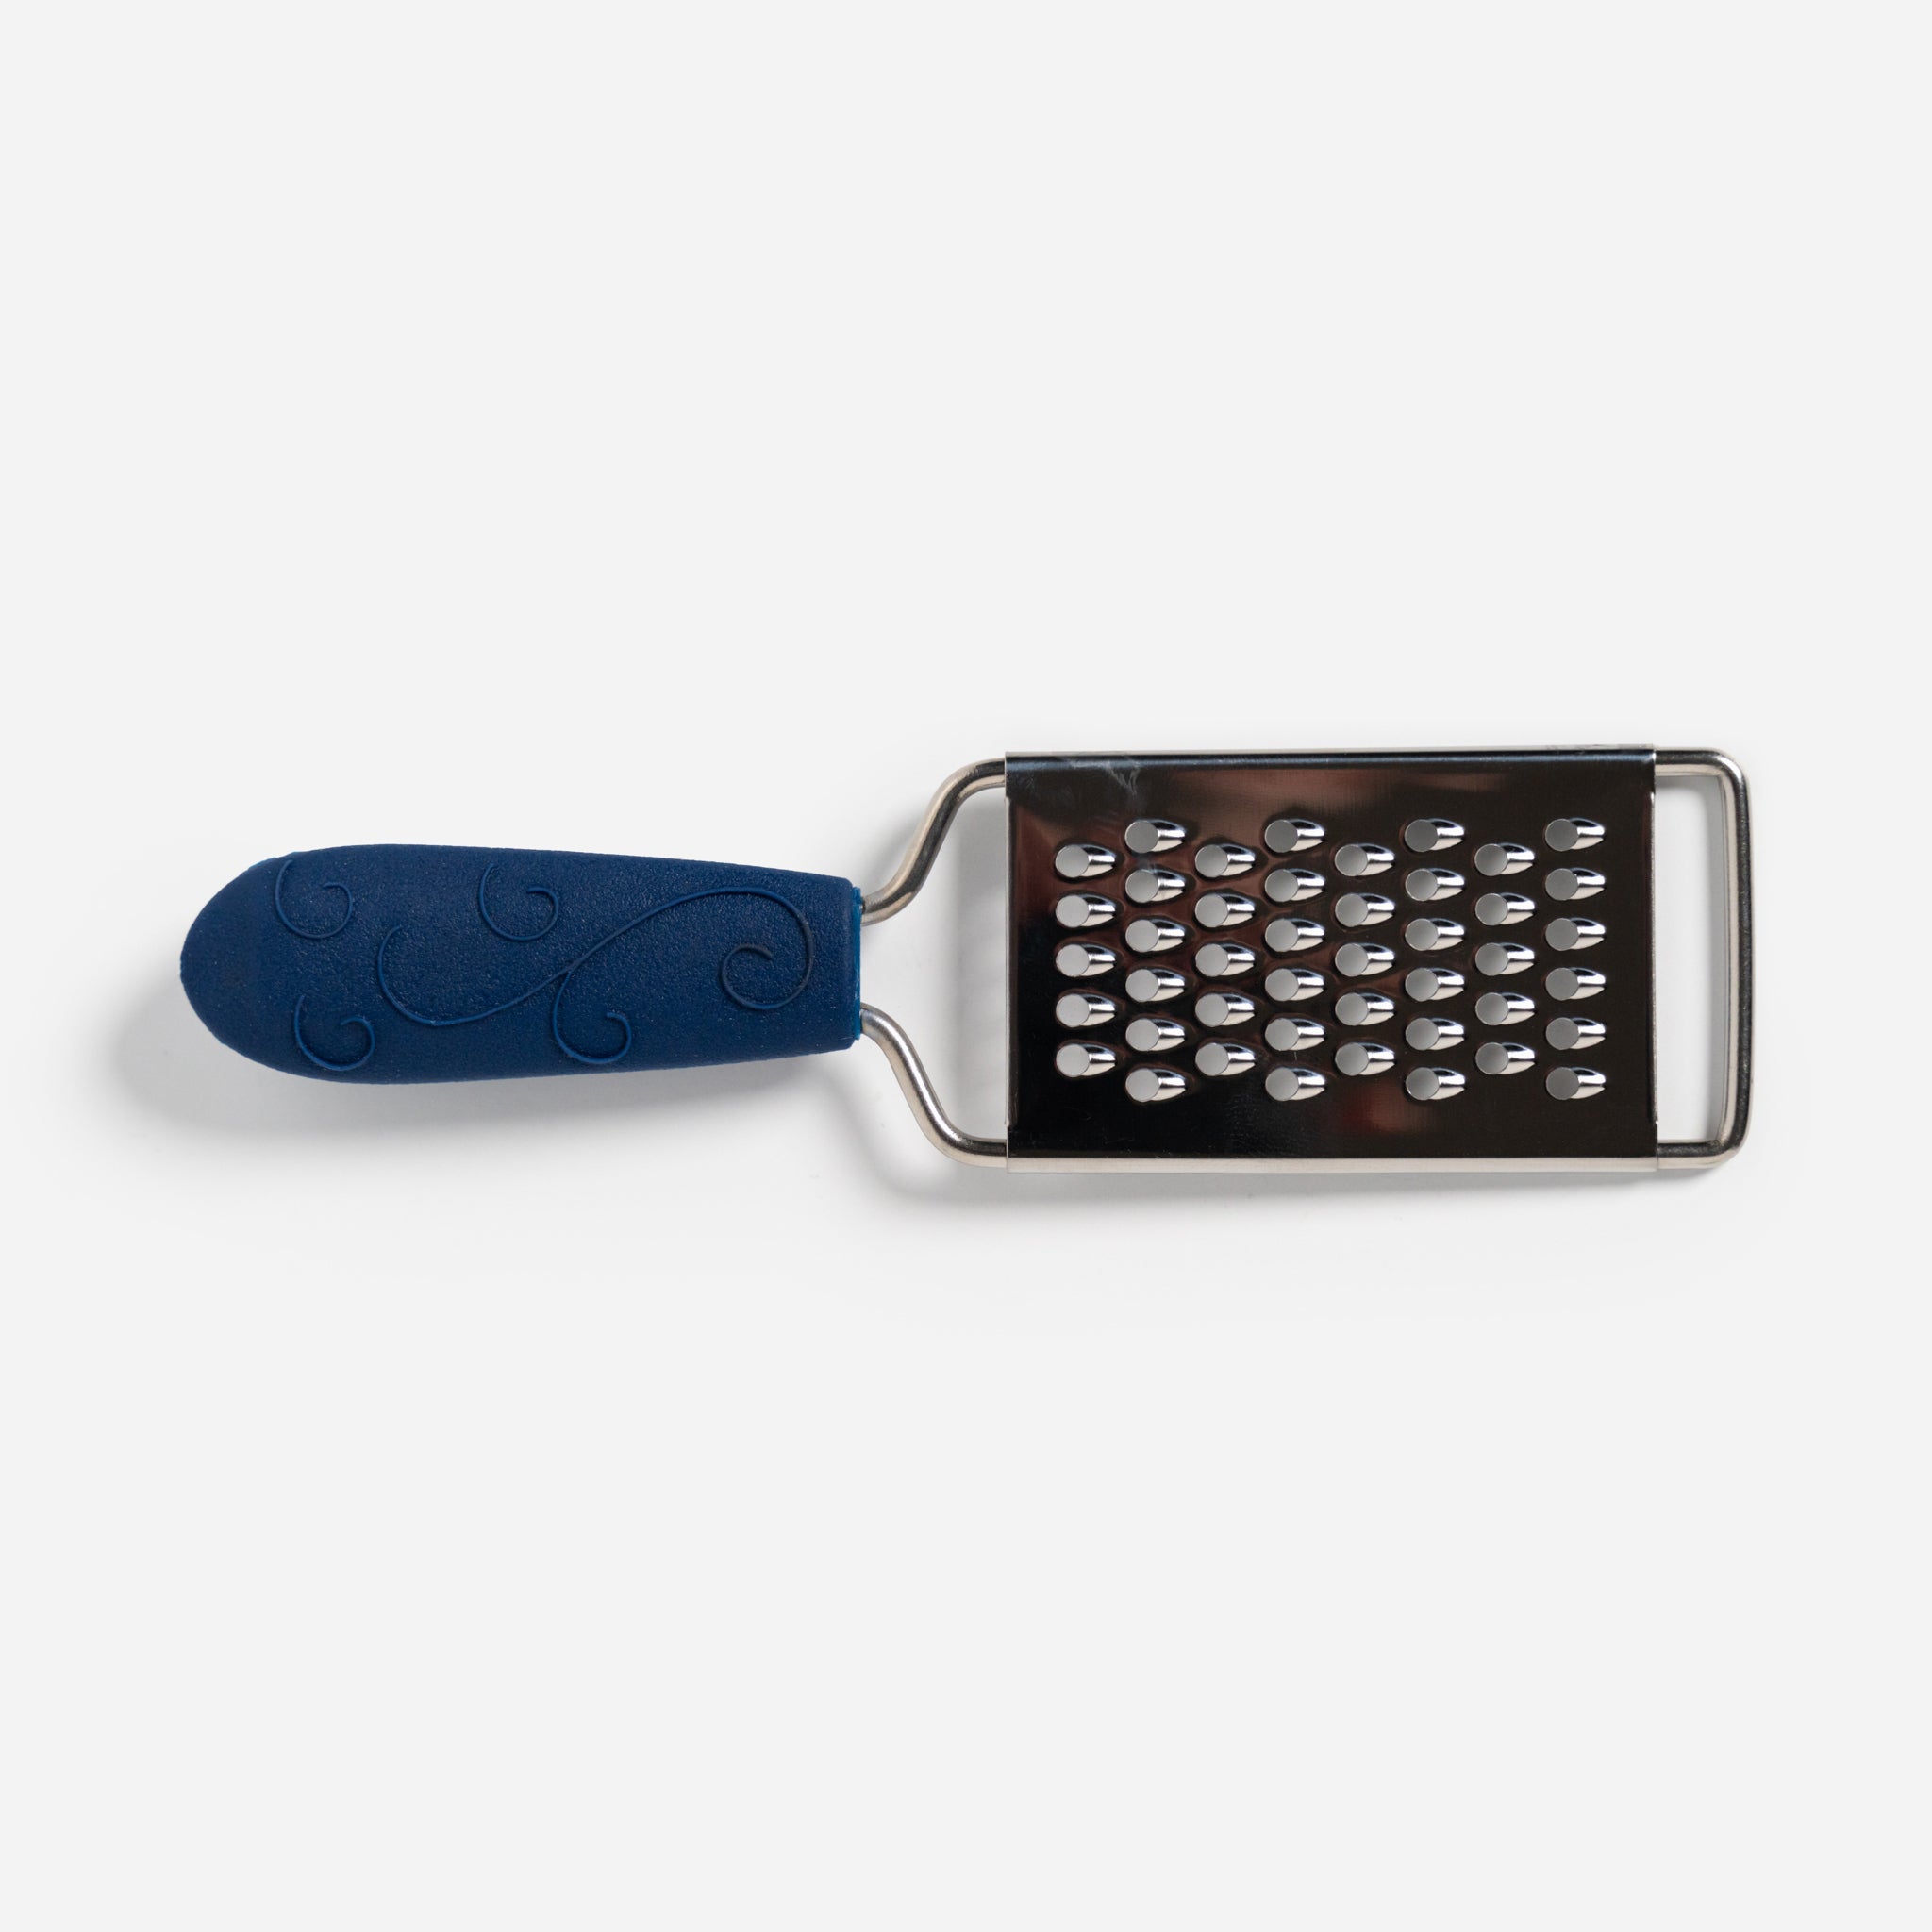 Small Size Chesse Grater Stainless Steel Cheese Grater Small